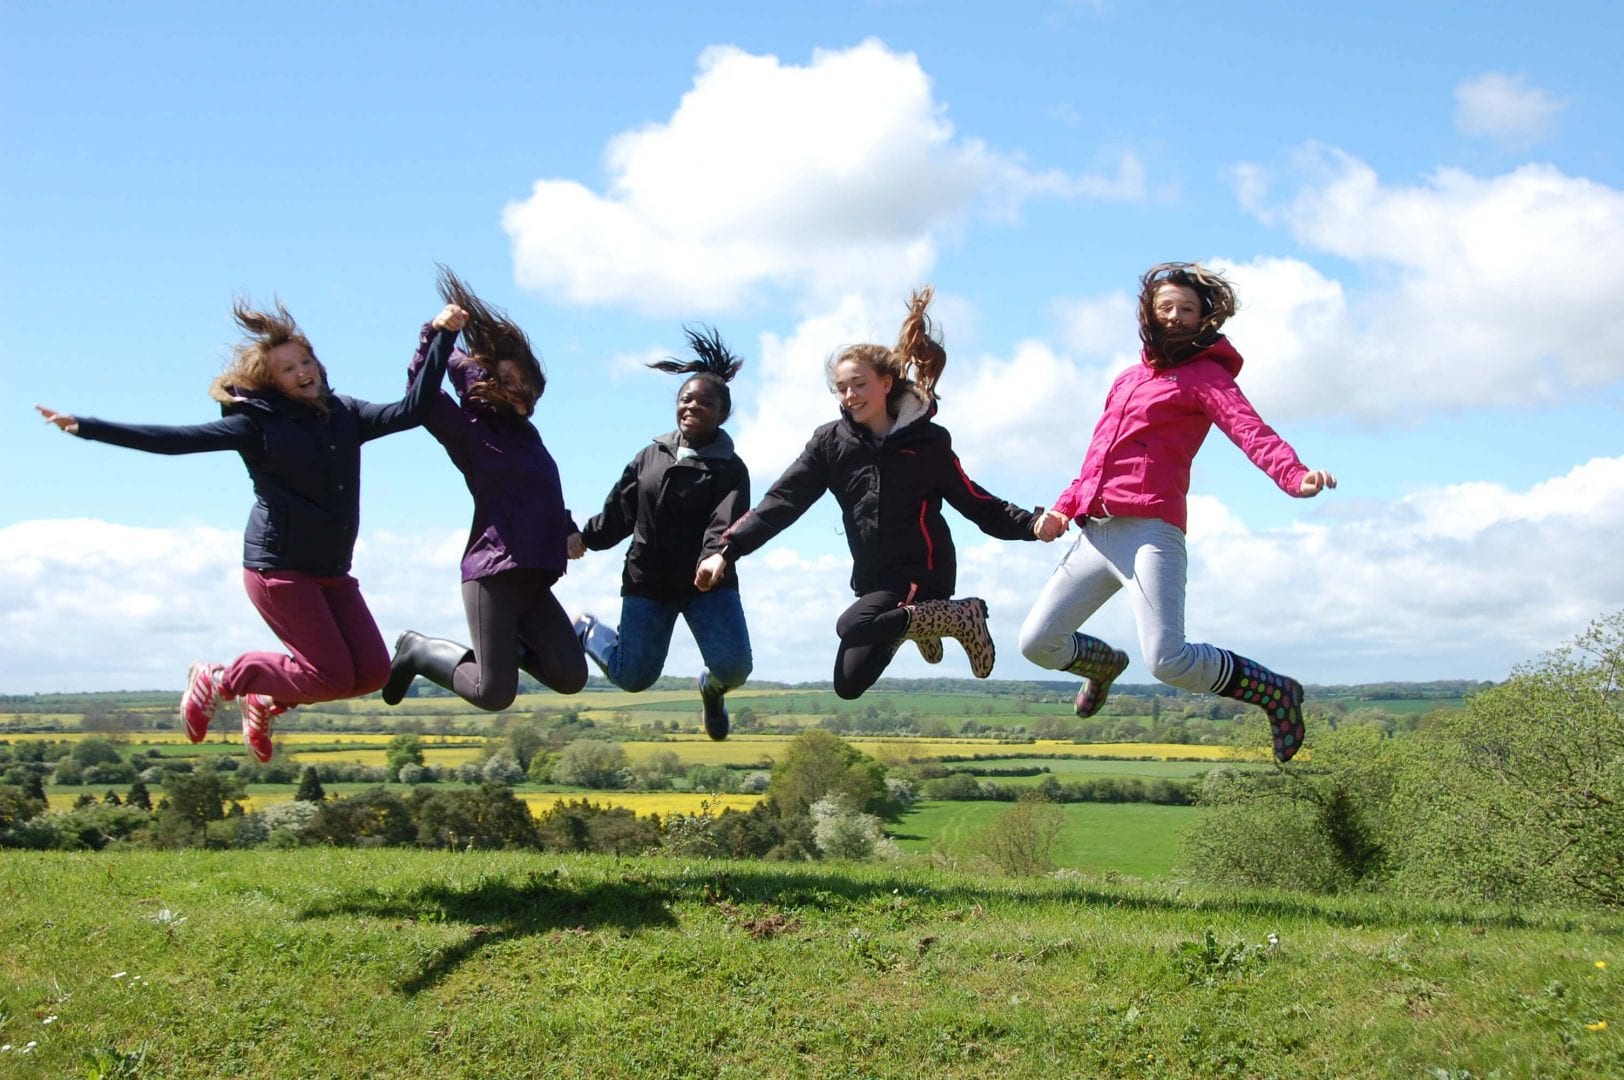 Girls jumping at the Chellington Centre in Bedfordshire